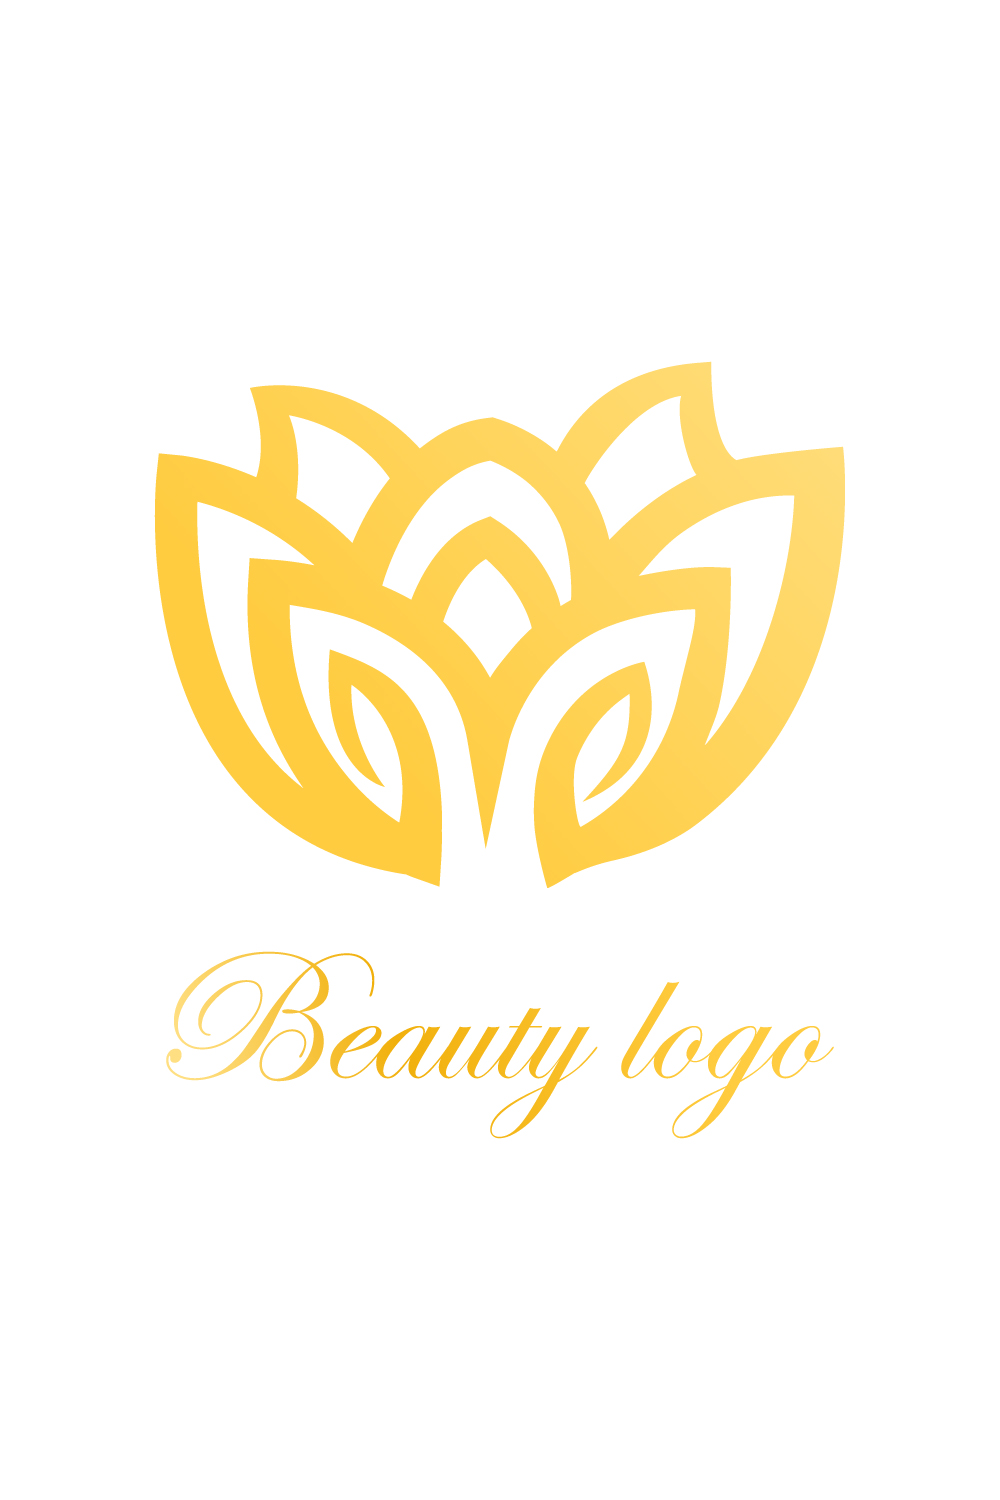 Beauty Flower logo design Marigold Flower logo design vector images Beautiful Lotas logo and Water lily icon template illustration pinterest preview image.